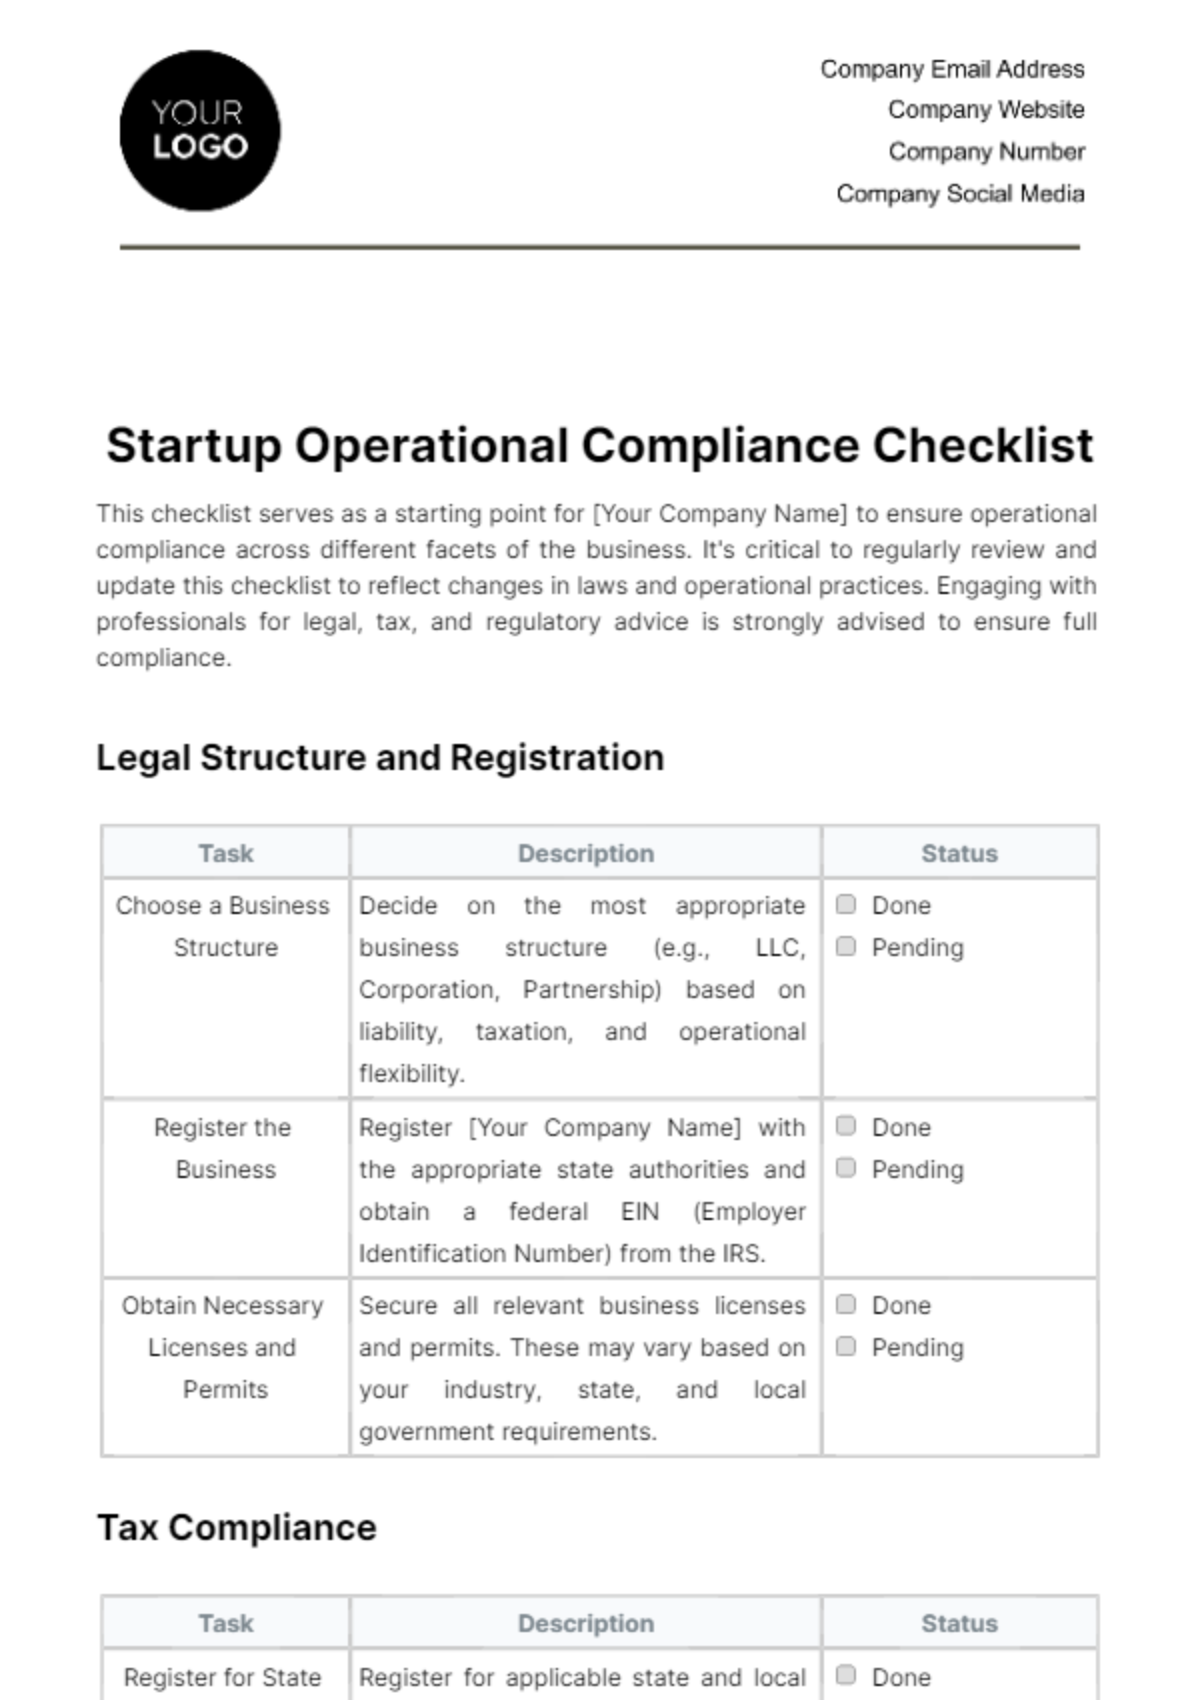 Free Startup Operational Compliance Checklist Template